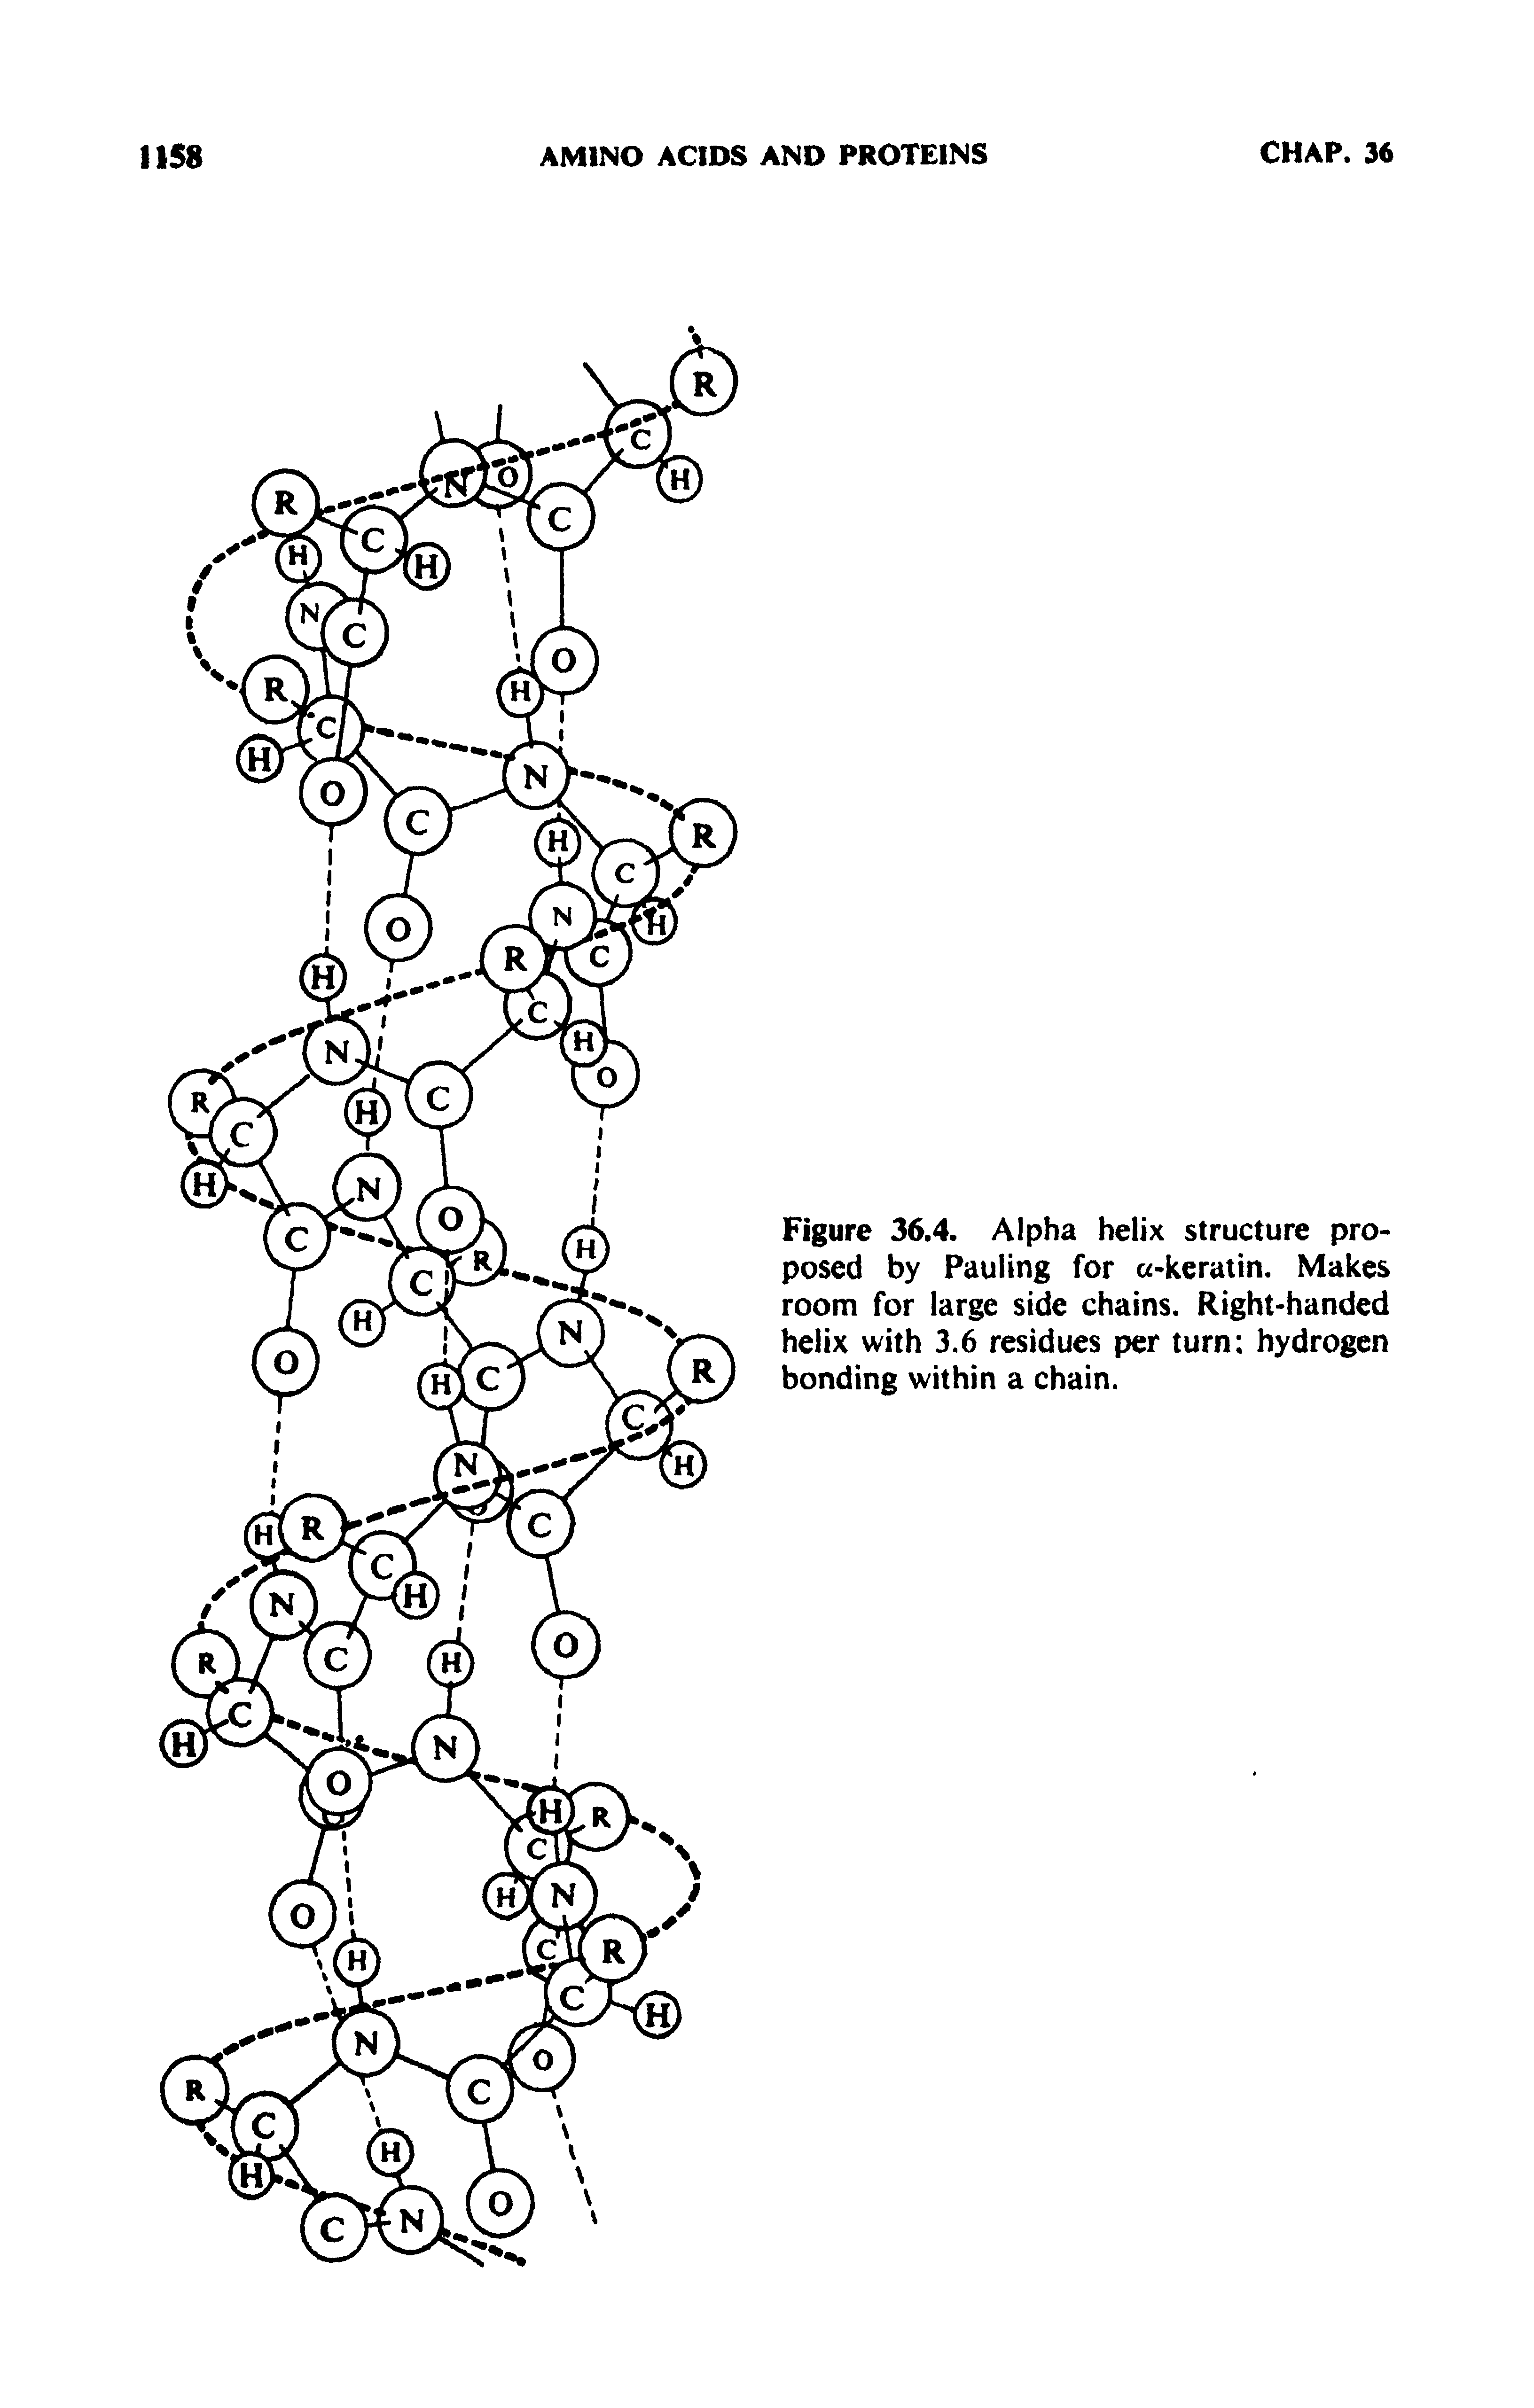 Figure 36.4. Alpha helix structure proposed by Pauling for -kcraiin. Makes room for large side chains. Right-handed helix with 3.6 residues per turn hydrogen bonding within a chain.